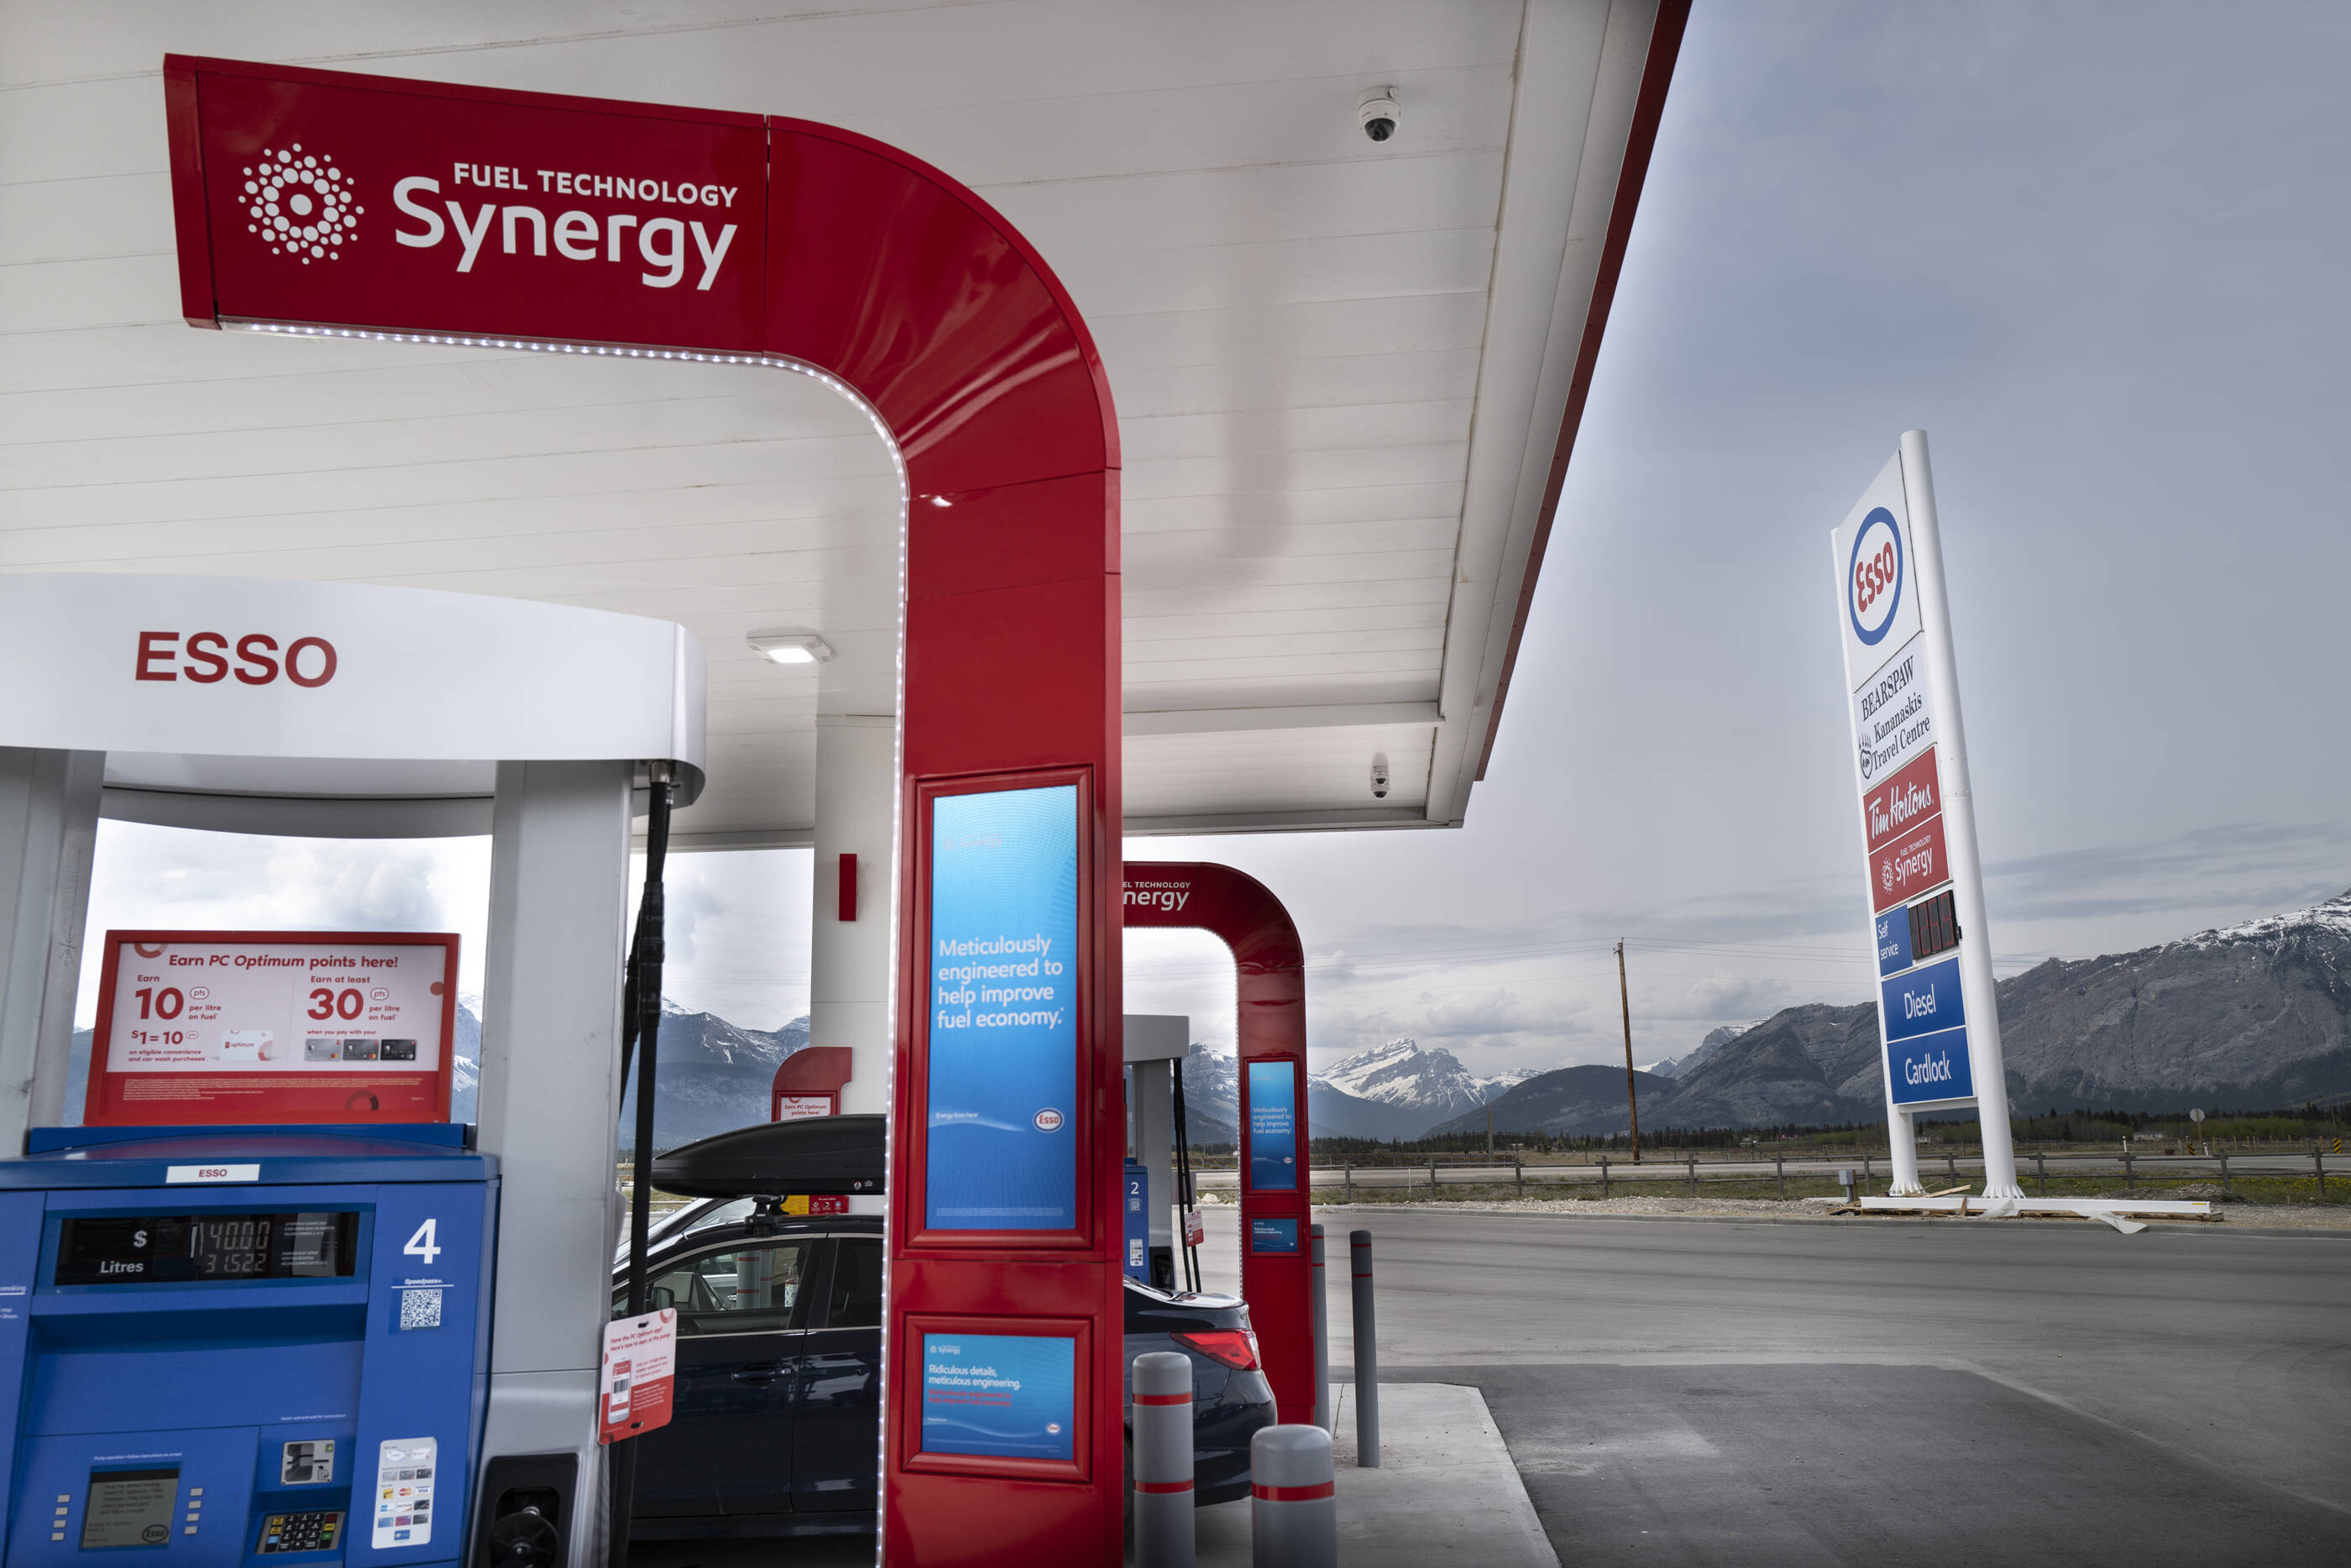 Imperial becomes the official fuel partner of PC Optimum loyalty program, allowing customer to earn PC Optimum points at over 2,000 Esso and Mobil stations across the country.